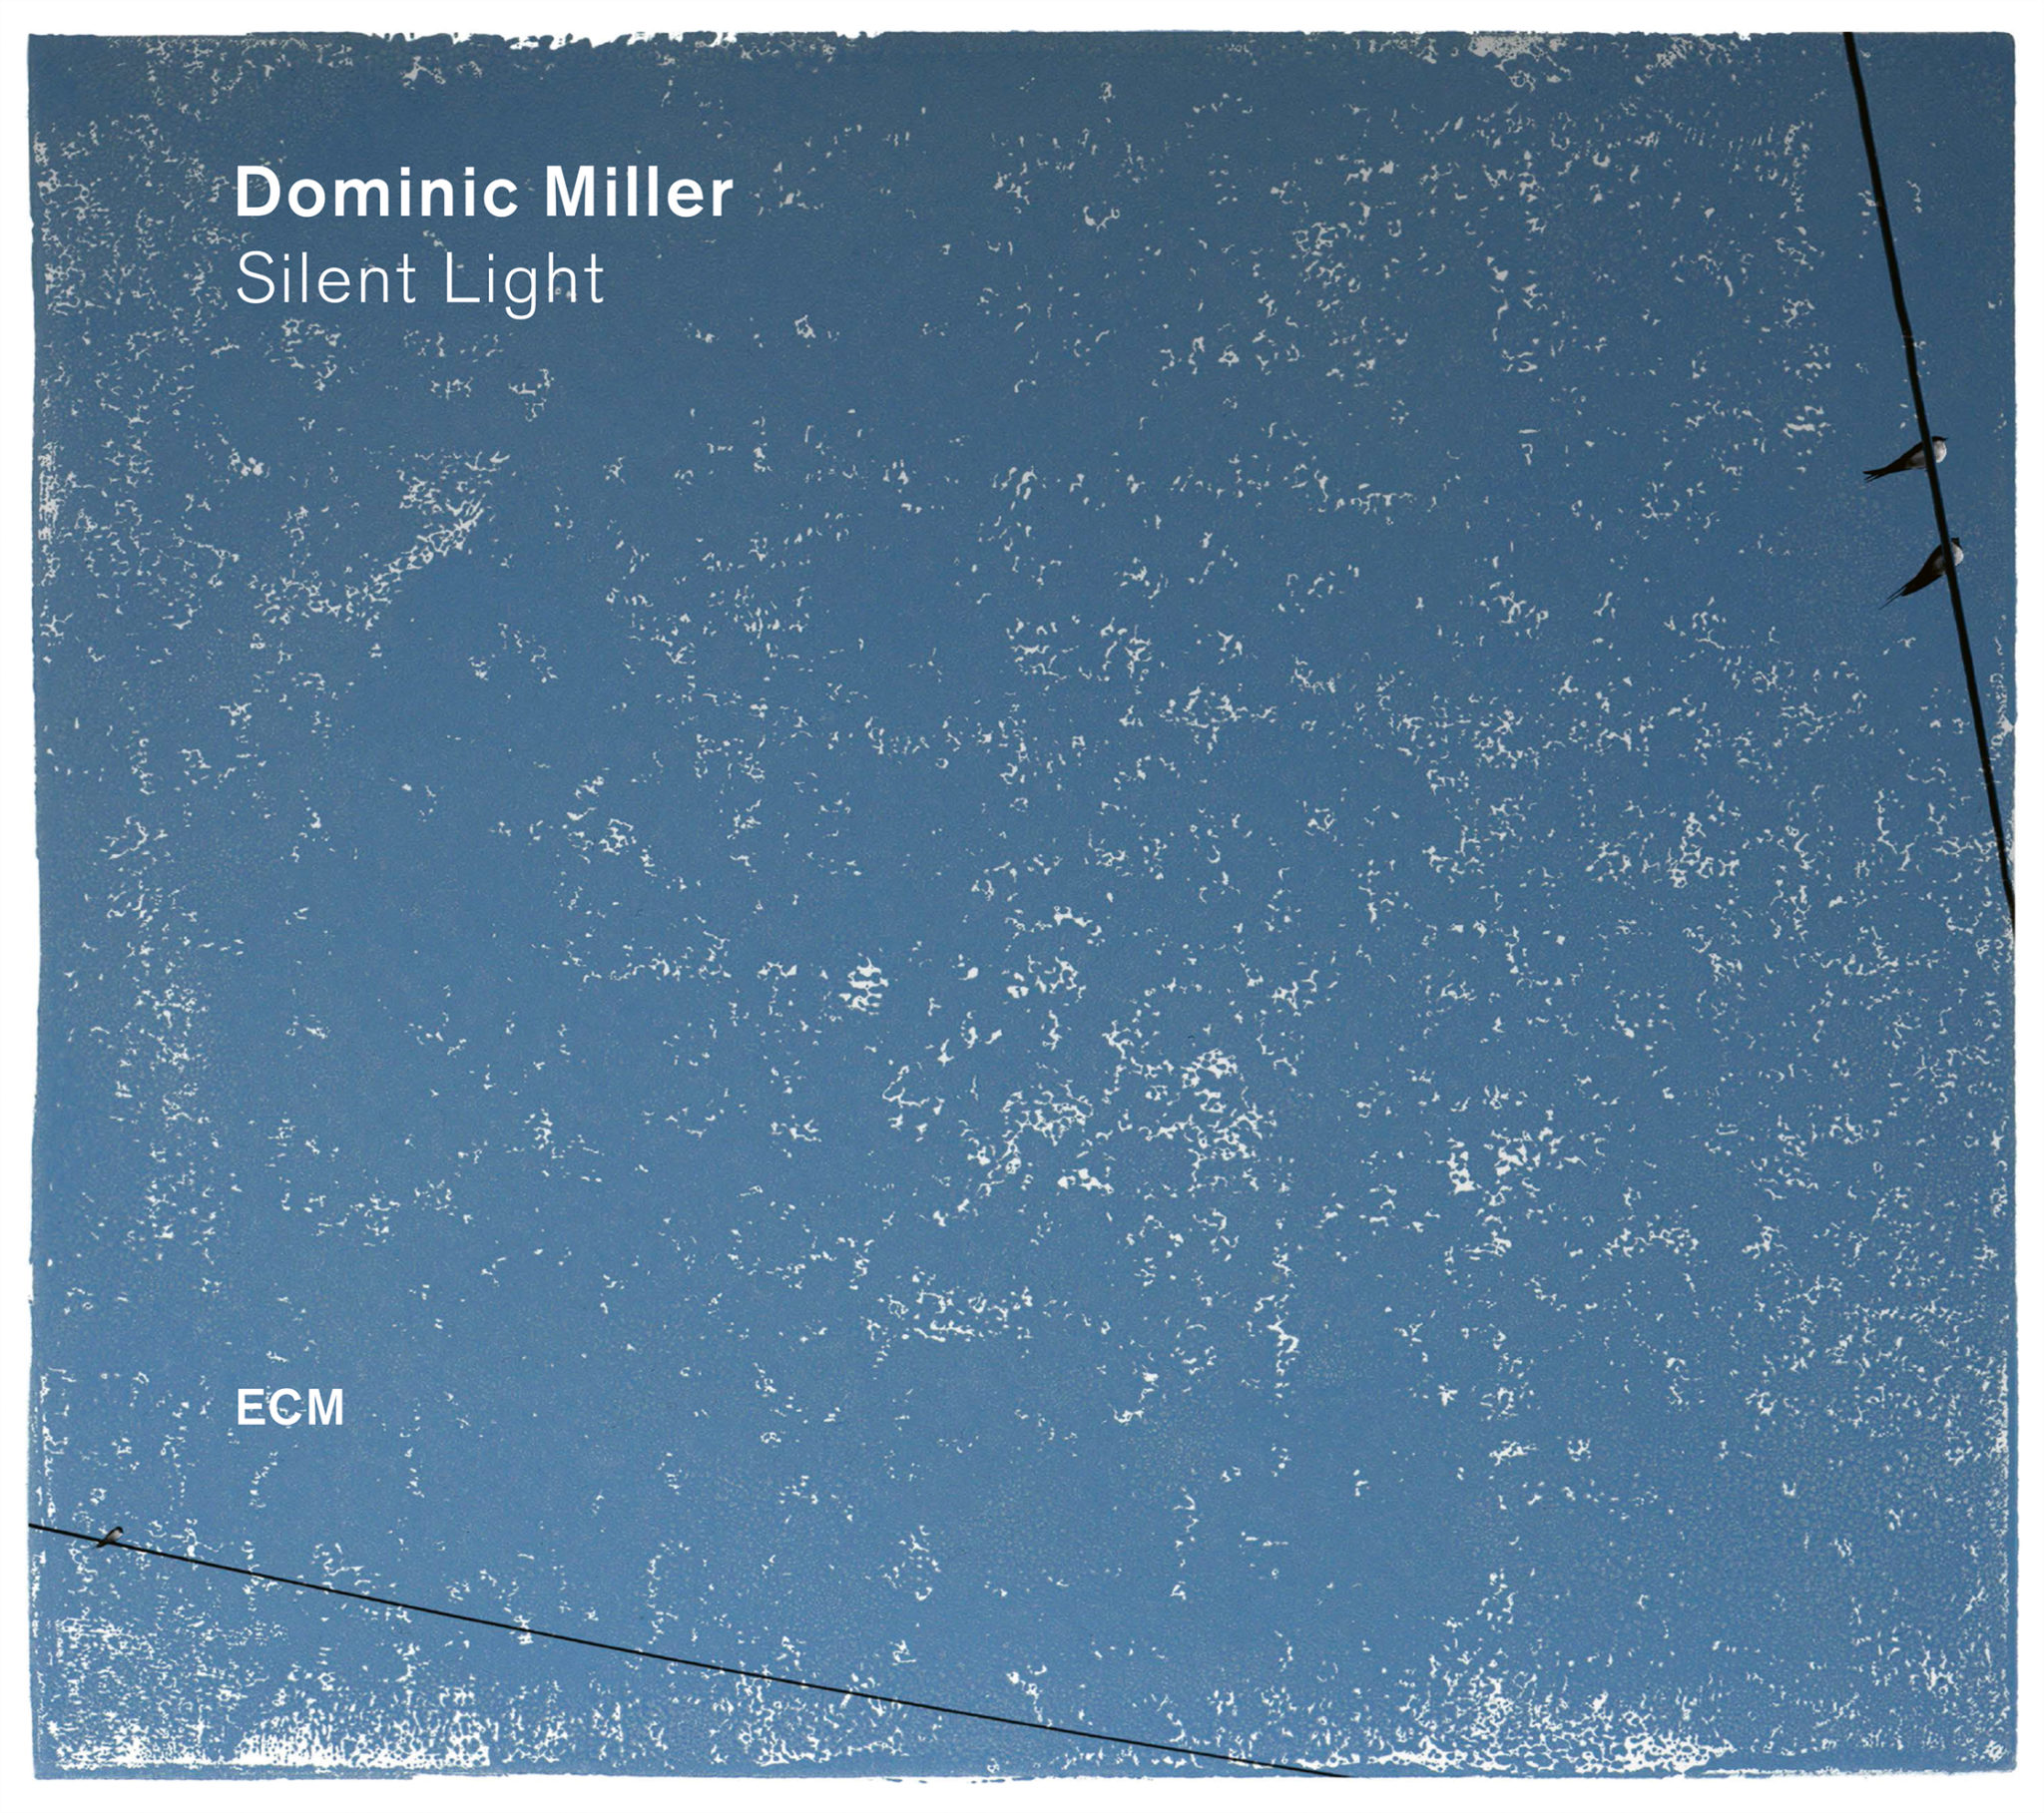 REVIEW: Dominic Miller - Silent Night